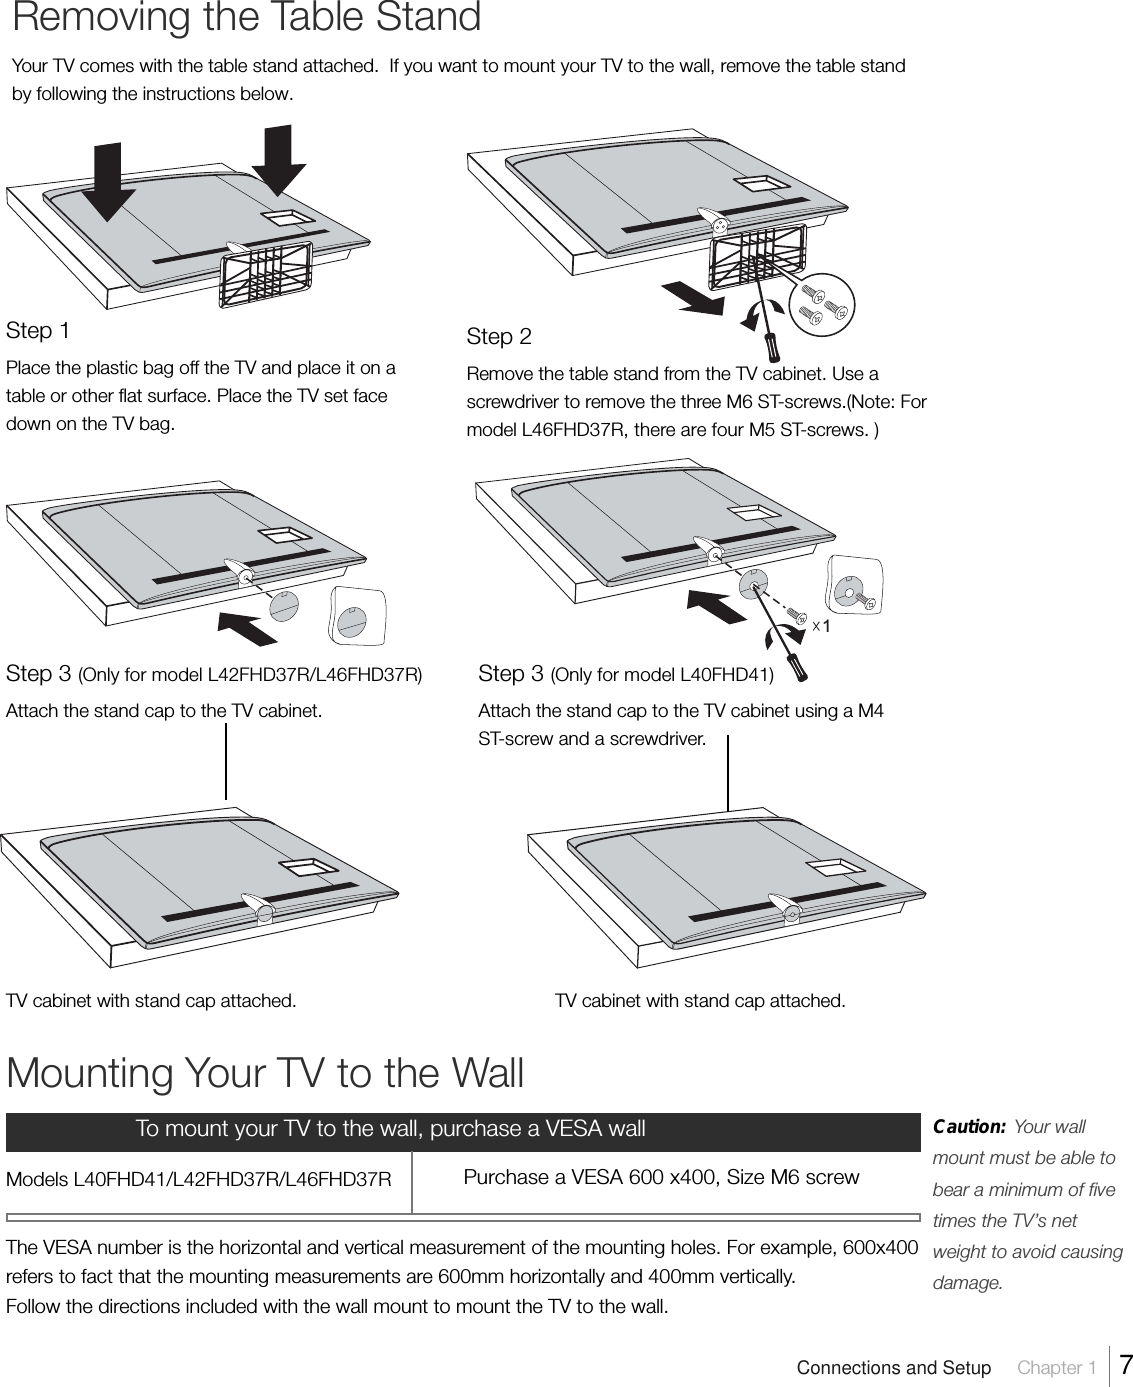 Removing the Table StandYour TV comes with the table stand attached.  If you want to mount your TV to the wall, remove the table standby following the instructions below.Step 1Place the plastic bag off the TV and place it on atable or other flat surface. Place the TV set facedown on the TV bag.Step 3 (Only for model L42FHD37R/L46FHD37R)Attach the stand cap to the TV cabinet.TV cabinet with stand cap attached.Connections and Setup     Chapter 1    7Step 2Remove the table stand from the TV cabinet. Use ascrewdriver to remove the three M6 ST-screws.(Note: Formodel L46FHD37R, there are four M5 ST-screws. )1Mounting Your TV to the WallThe VESA number is the horizontal and vertical measurement of the mounting holes. For example, 600x400refers to fact that the mounting measurements are 600mm horizontally and 400mm vertically.Follow the directions included with the wall mount to mount the TV to the wall.Caution:     Your wallmount must be able tobear a minimum of fivetimes the TV’s netweight to avoid causingdamage.To mount your TV to the wall, purchase a VESA wallModels L40FHD41/L42FHD37R/L46FHD37R Purchase a VESA 600 x400, Size M6 screwStep 3 (Only for model L40FHD41)Attach the stand cap to the TV cabinet using a M4ST-screw and a screwdriver.TV cabinet with stand cap attached.